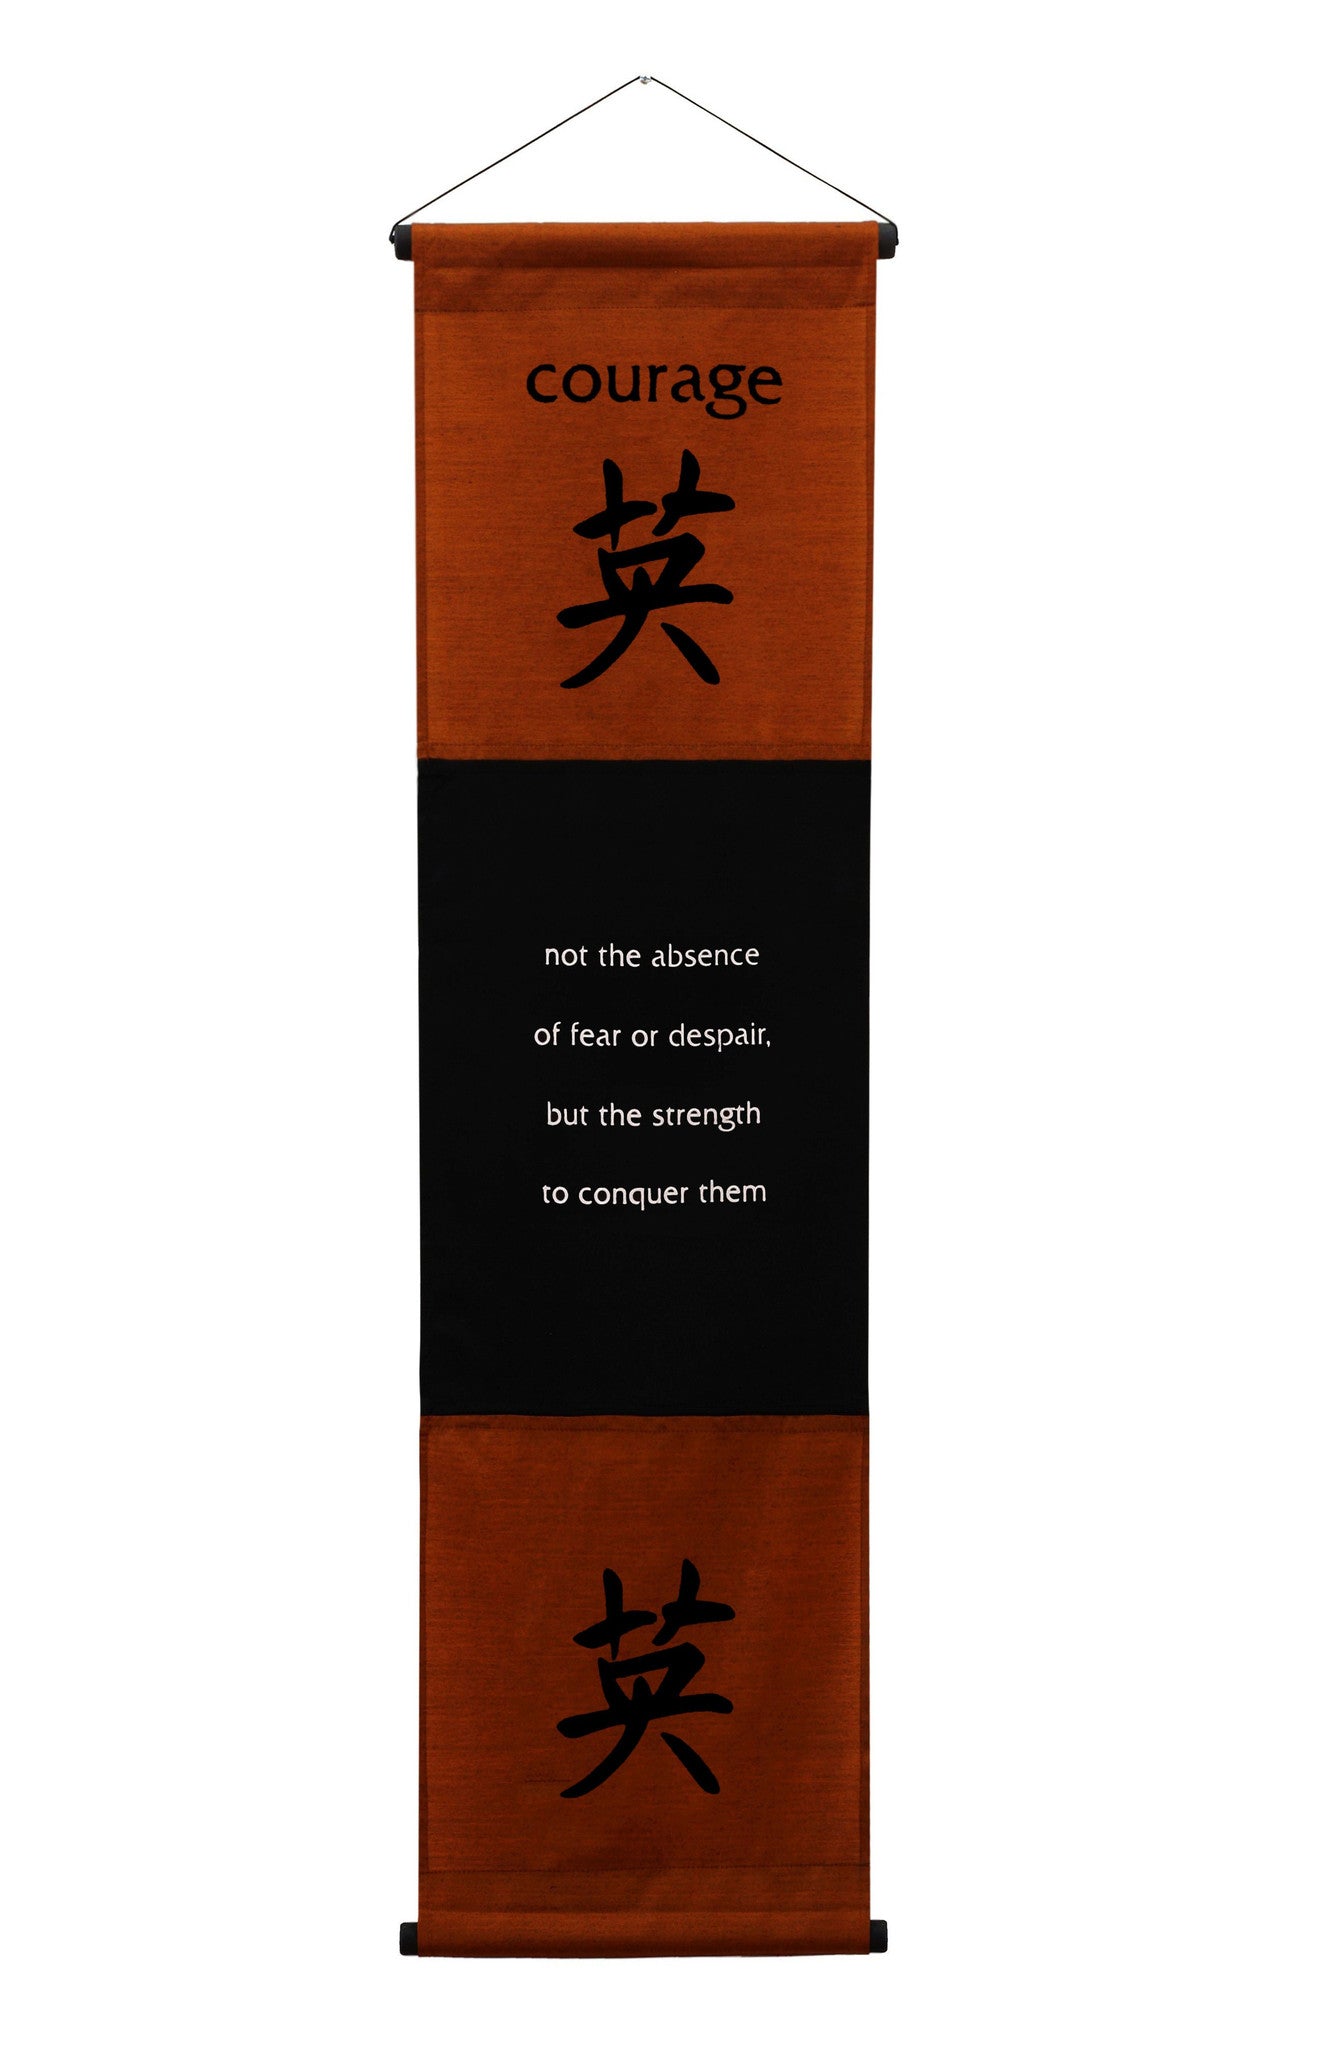 Inspirational Wall Decor "Courage" Banner Large, Inspiring Quote Wall Hanging Scroll, Affirmation Motivational Uplifting Art Decoration, Thought Saying Tapestry brown